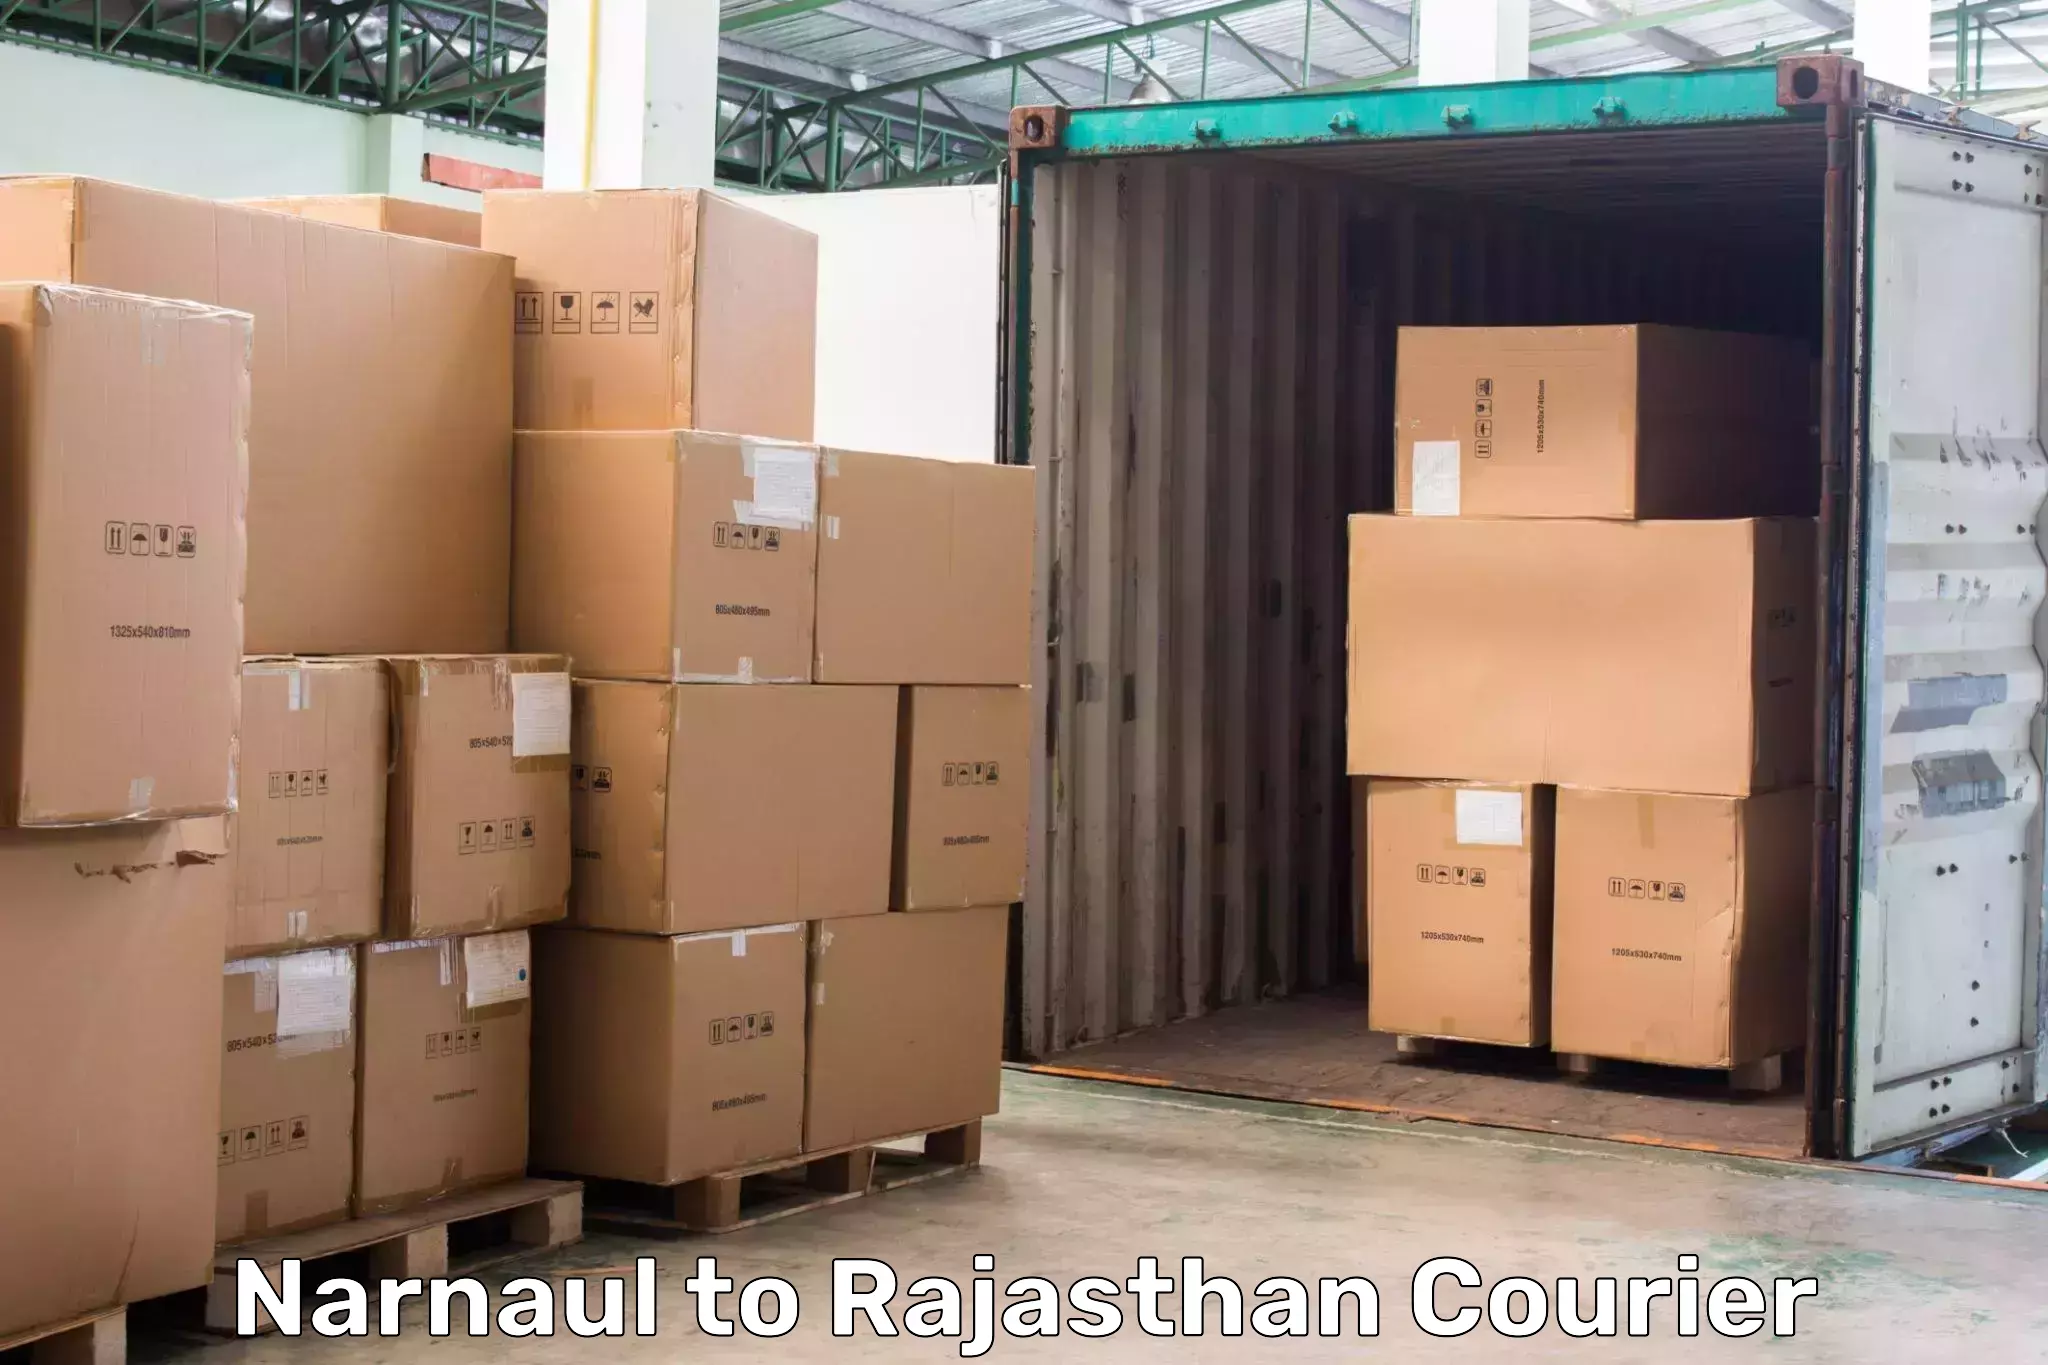 Package delivery network Narnaul to Nohar